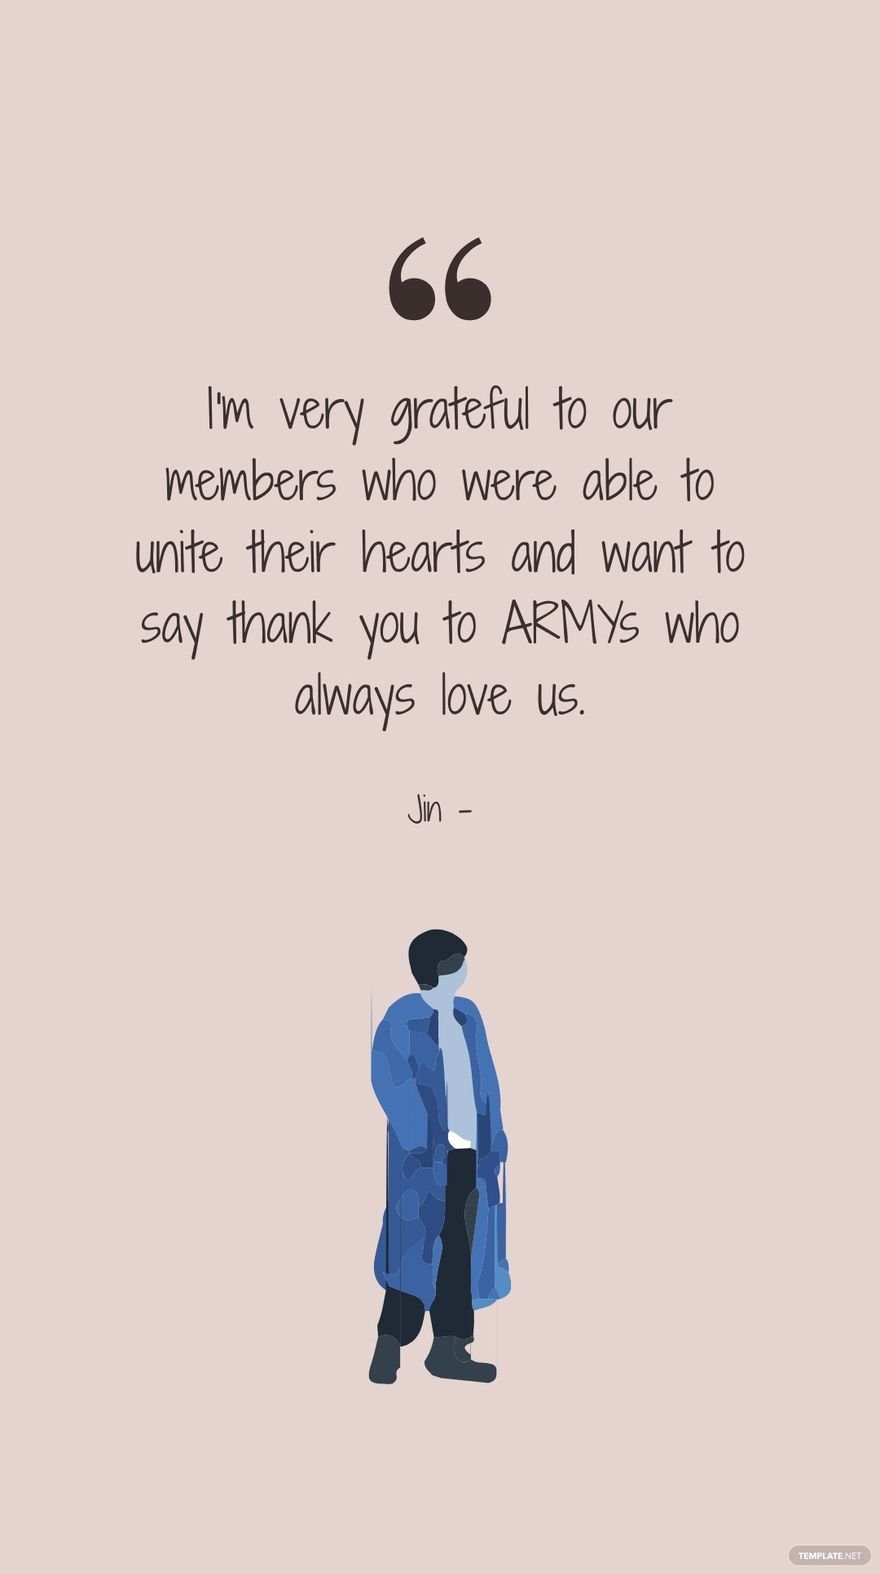 Jin - I'm very grateful to our members who were able to unite their hearts and want to say thank you to ARMYs who always love us. in JPG